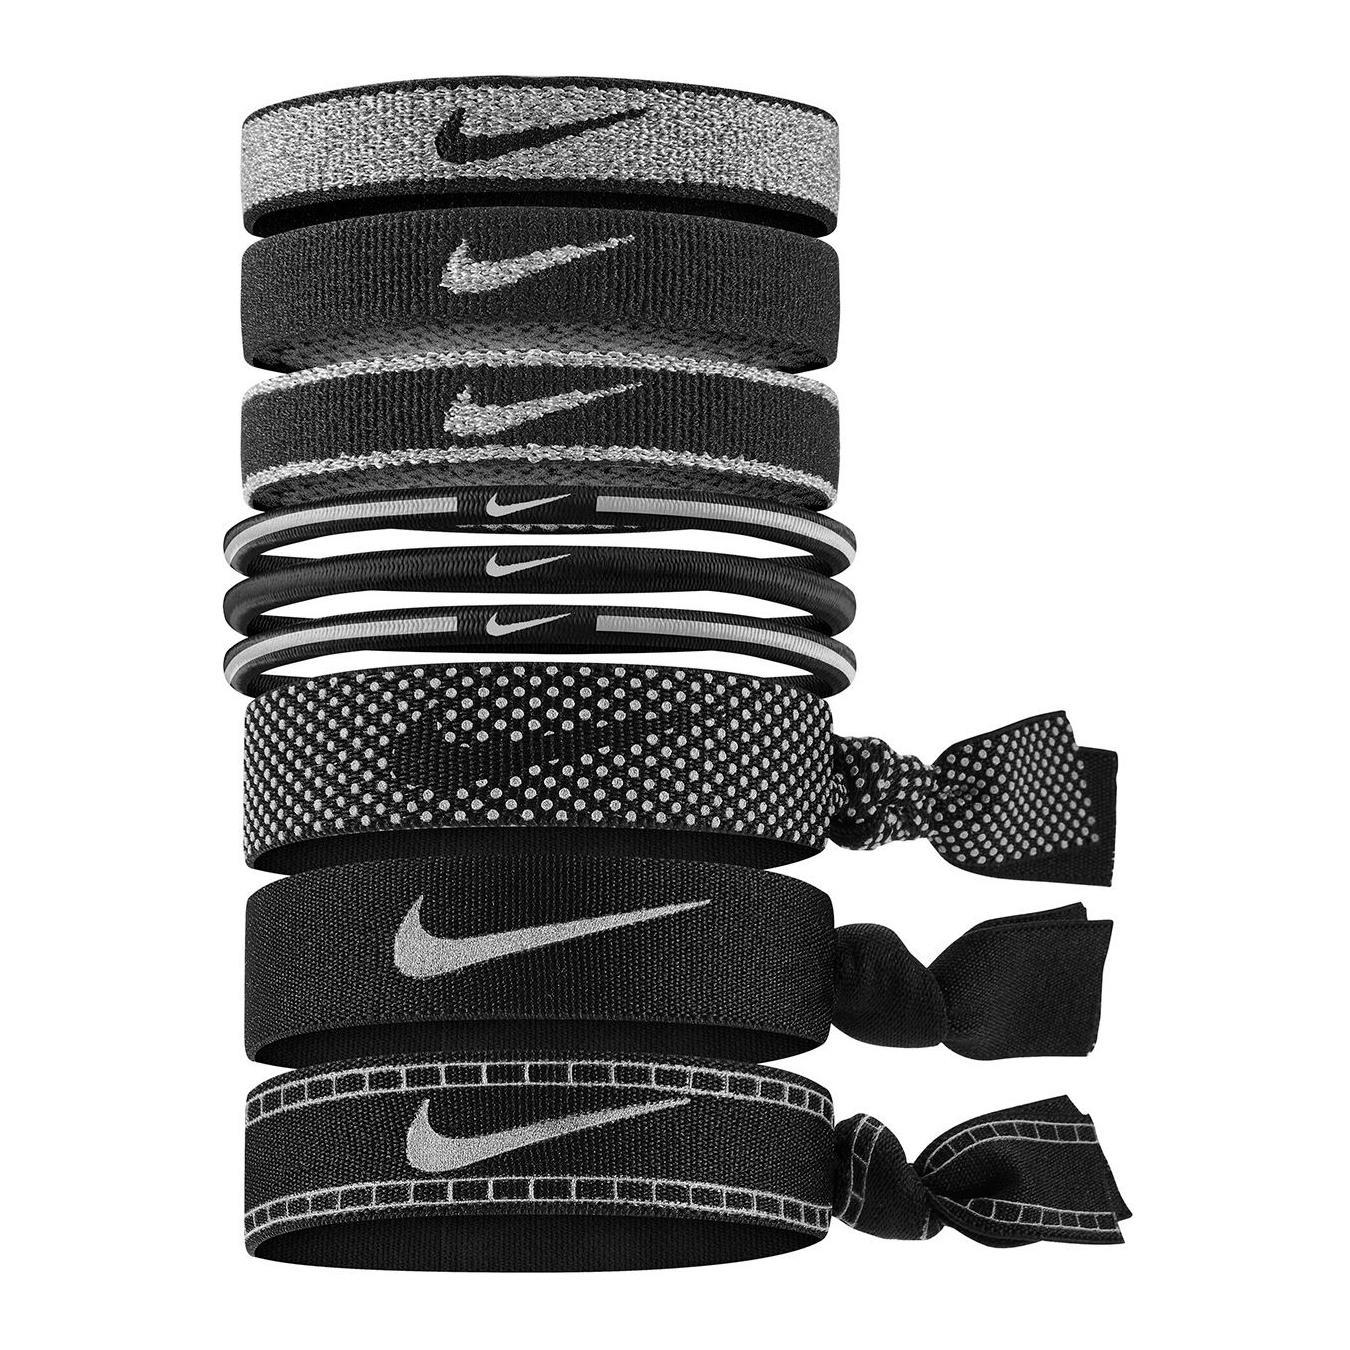 Nike Reflective Ponytail Holder (Pack Of 9) (Black/Silver) (One Size)